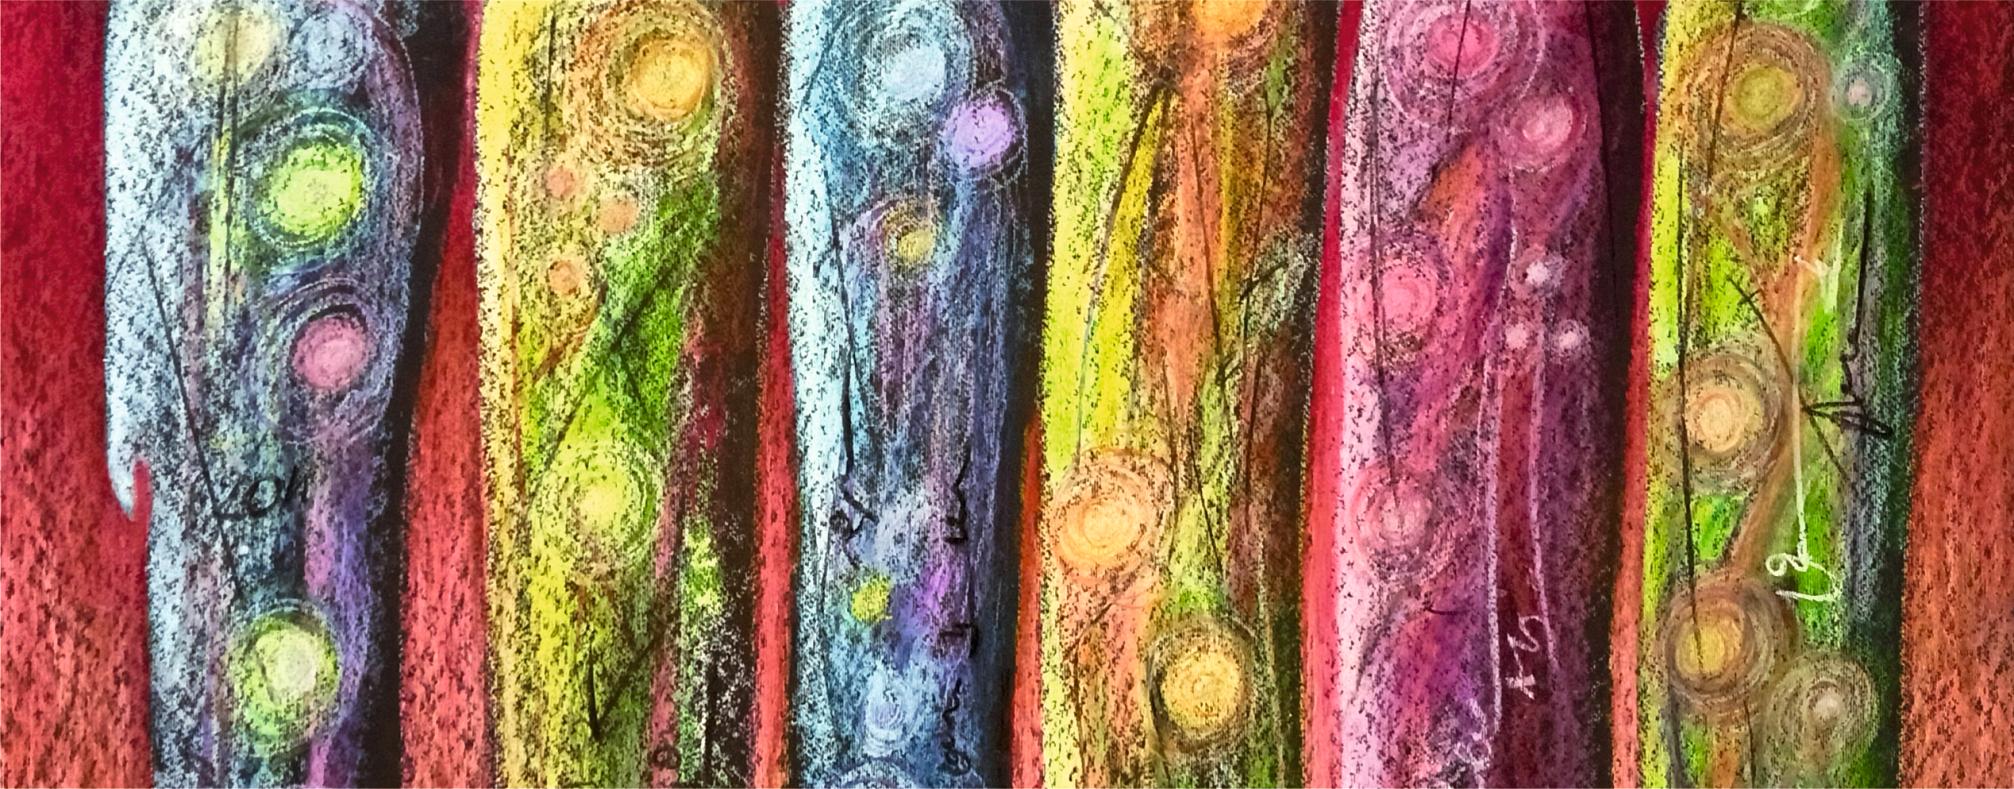 Six sisters / Oil pastel / 50 x 70 cm - Brown Abstract Painting by Tadeusz Zych